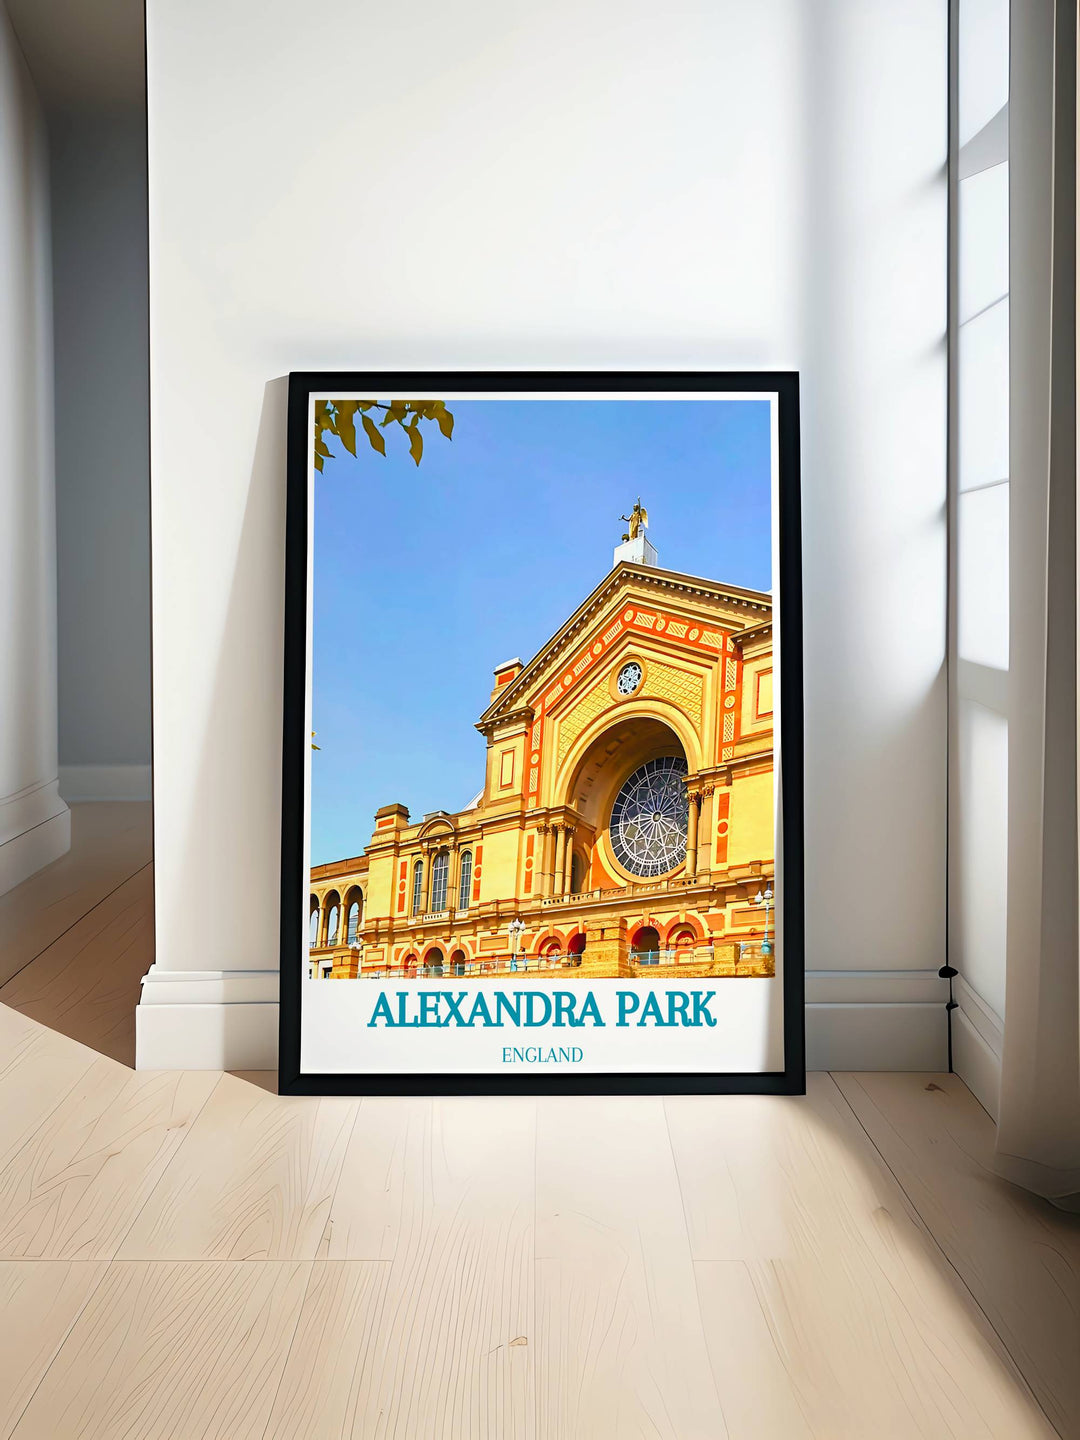 Bucket List Prints of London parks, combining the allure of Alexandra Palace and the tranquility of Hampstead Heath in one framed masterpiece.